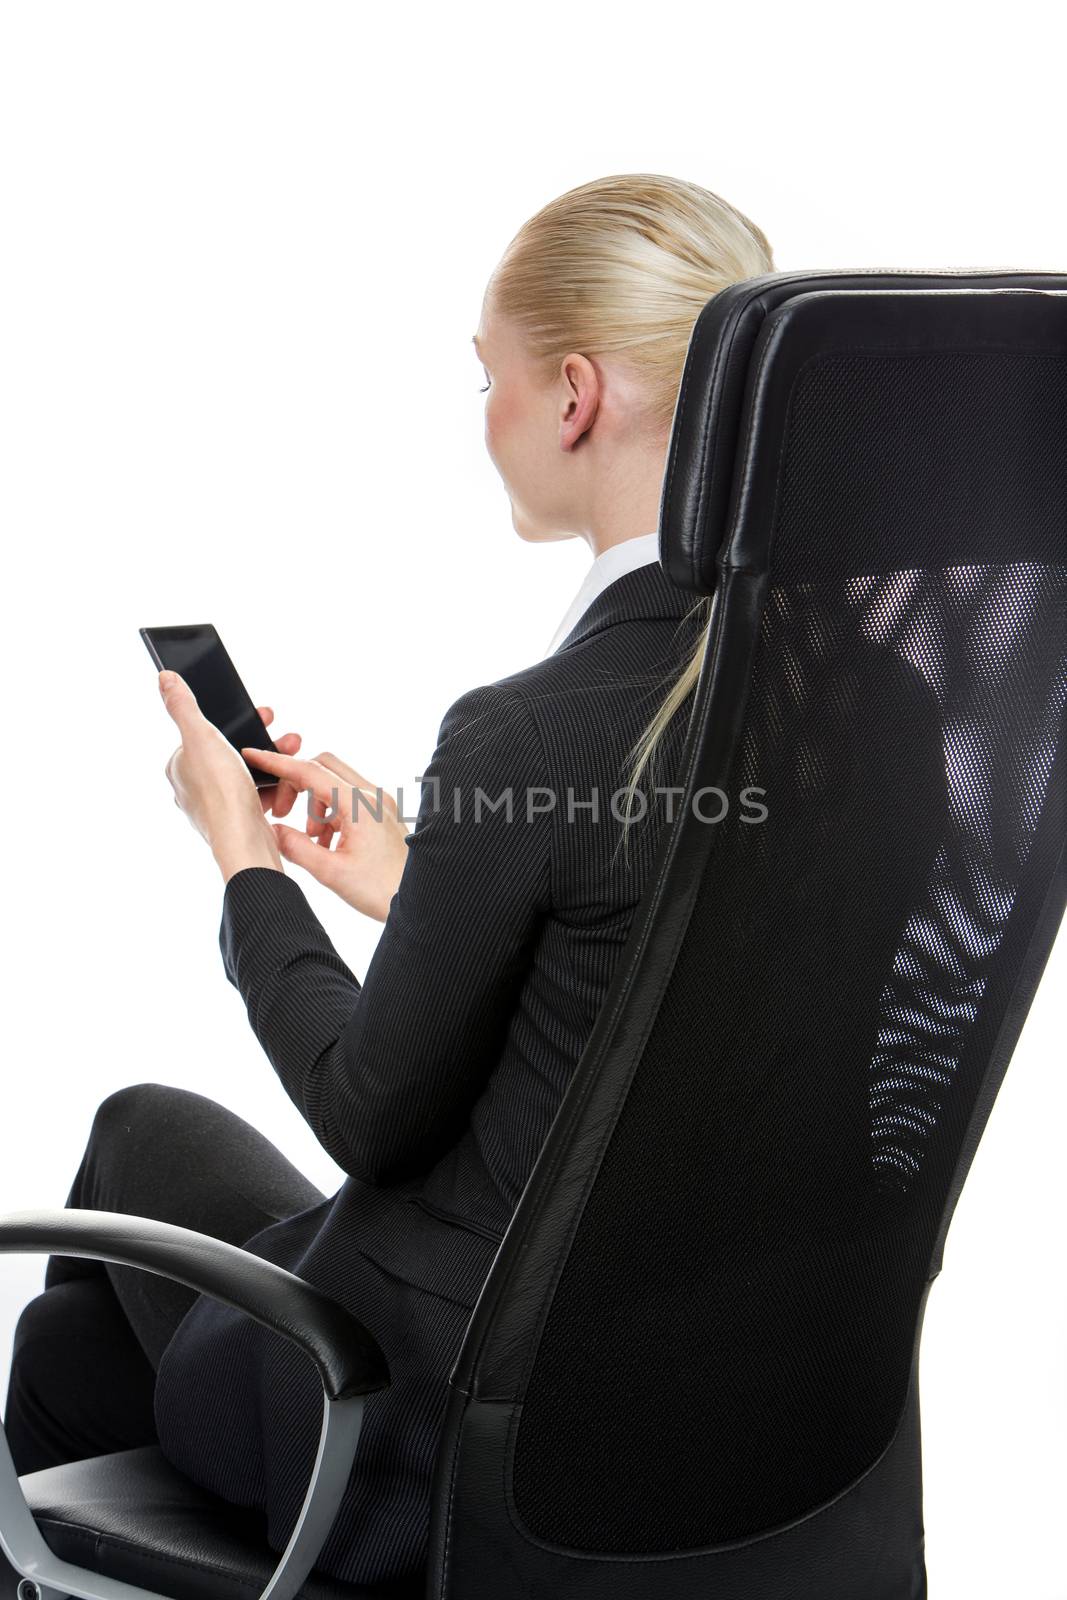 woman on a chair with mobile phone
 by Flareimage